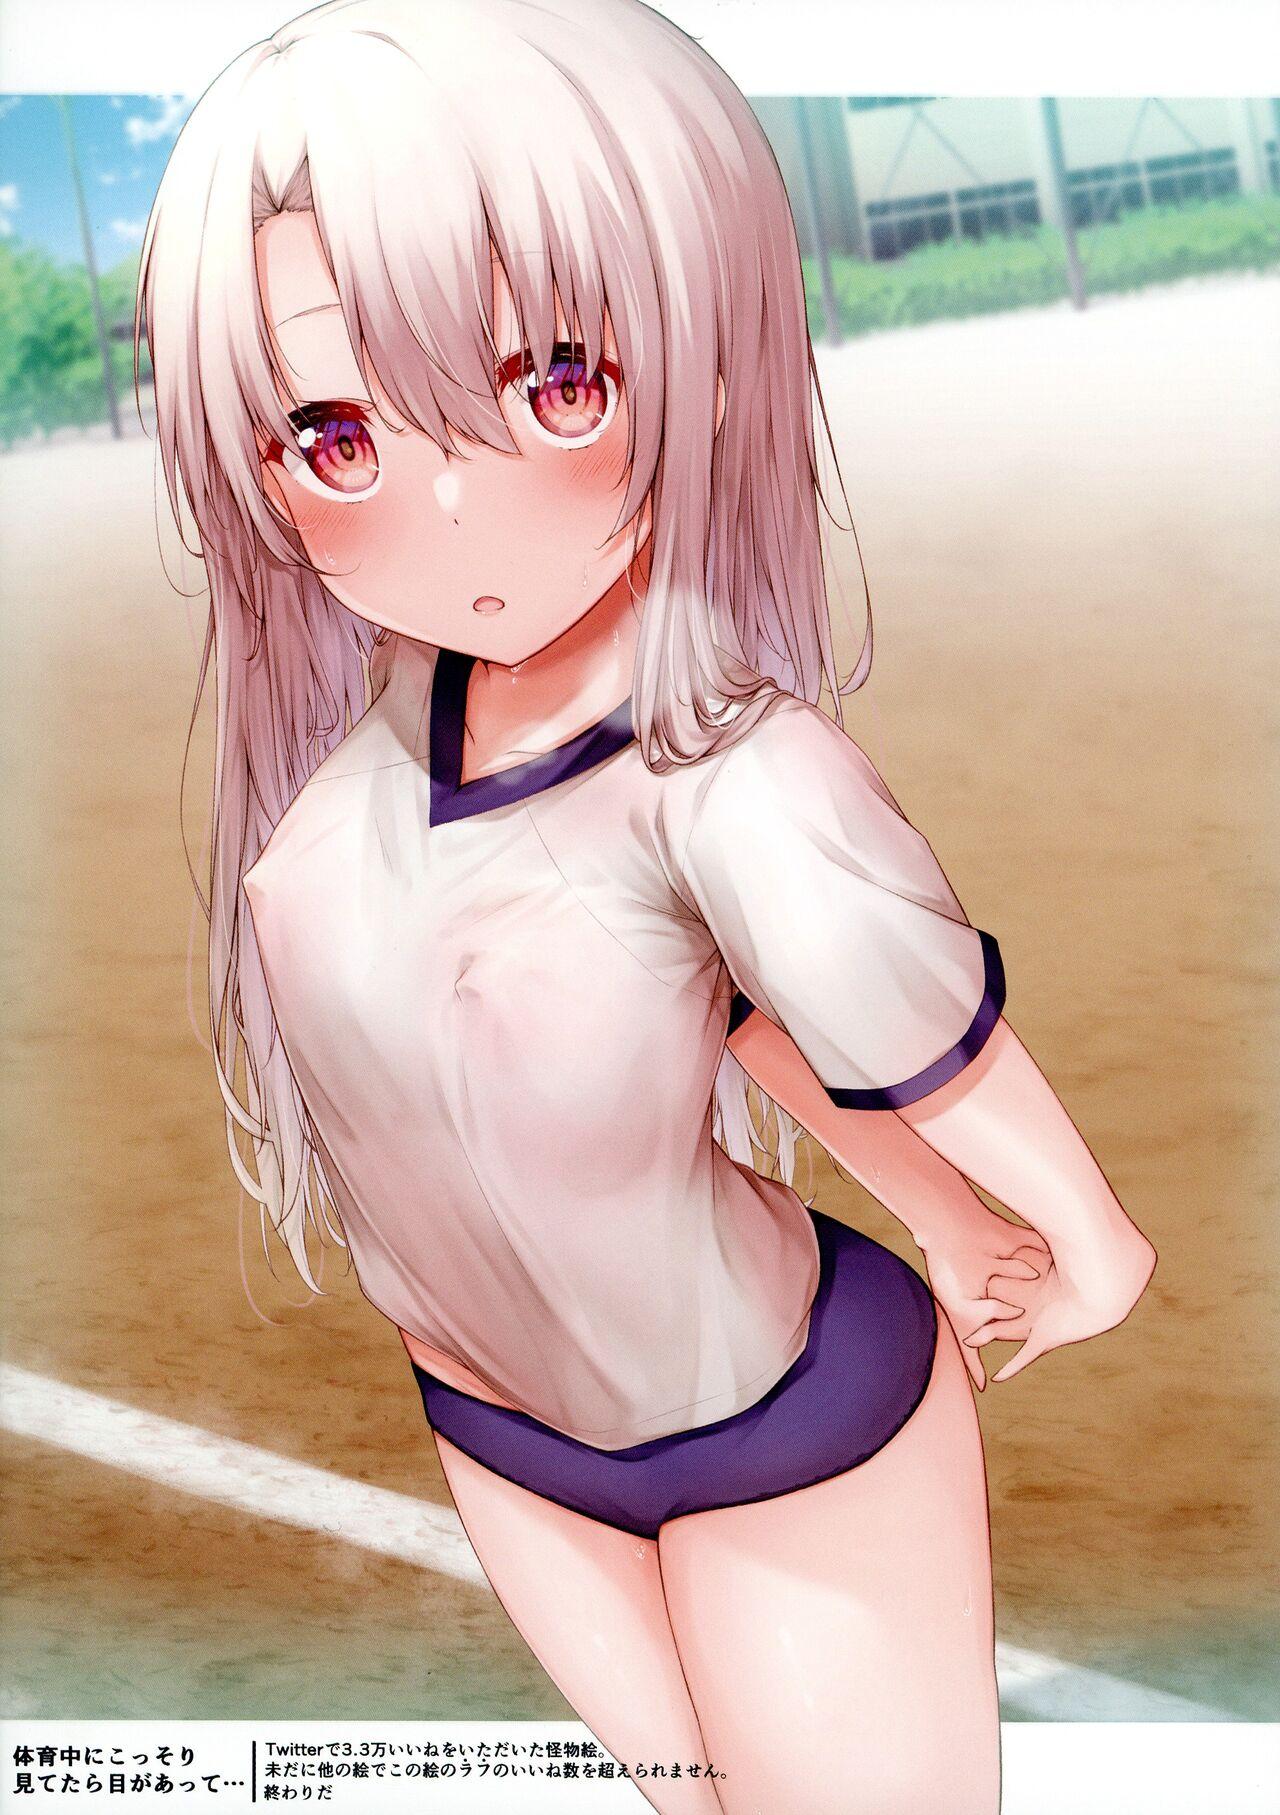 Webcamsex Mou Lolicon de Illya. 3 - Fate kaleid liner prisma illya Exhibitionist - Page 6